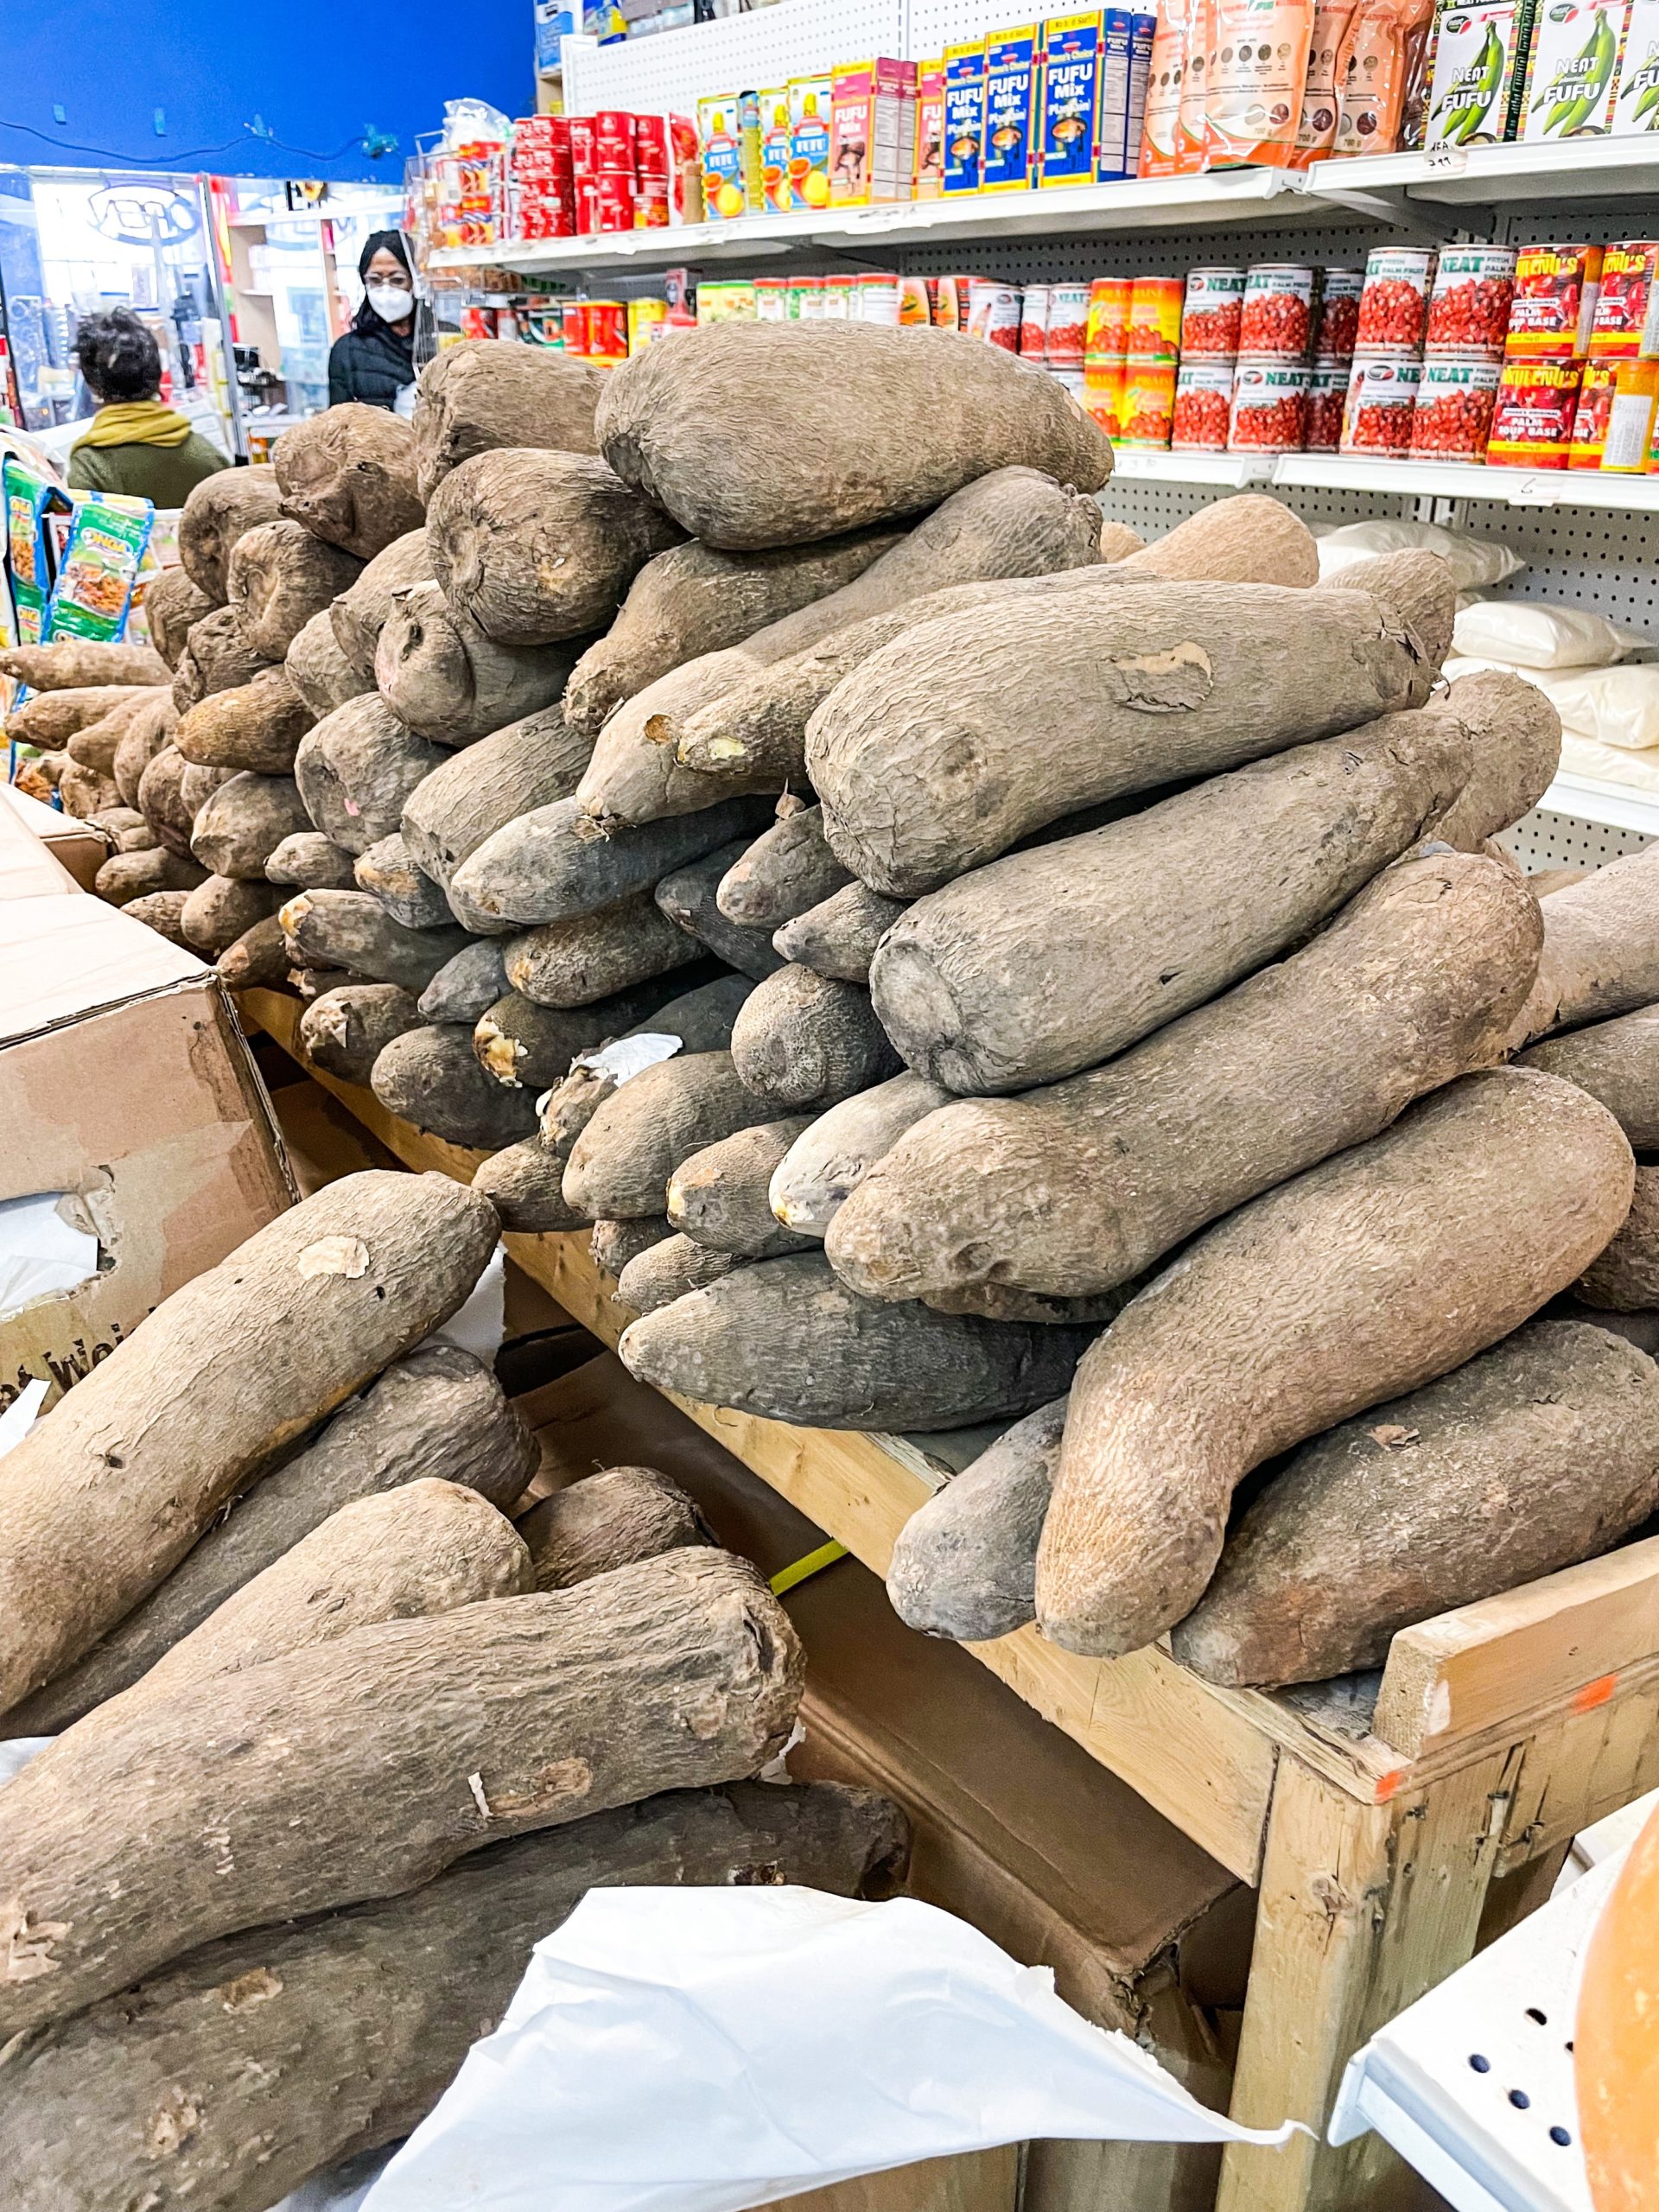 West African Yams Information and Facts